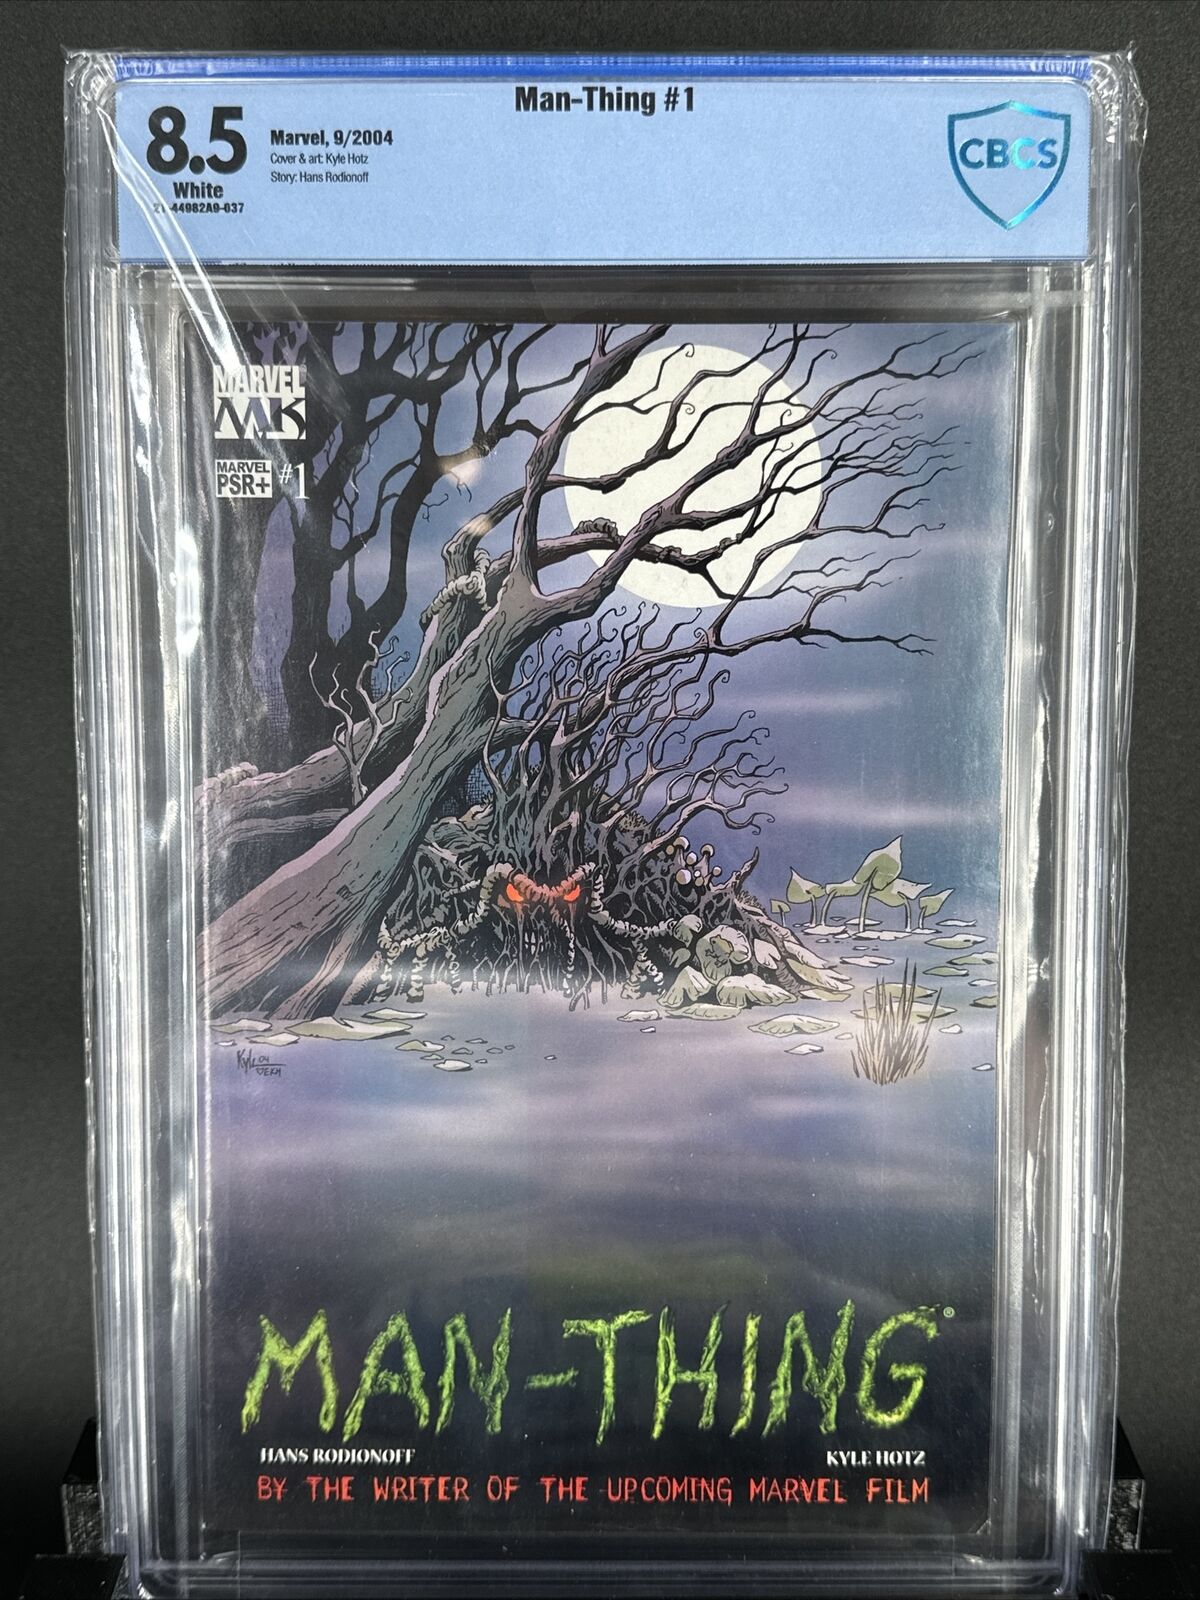 MAN-THING #1 CBCS 8.5 white pages Cover by KYLE HOTZ  MARVEL MK